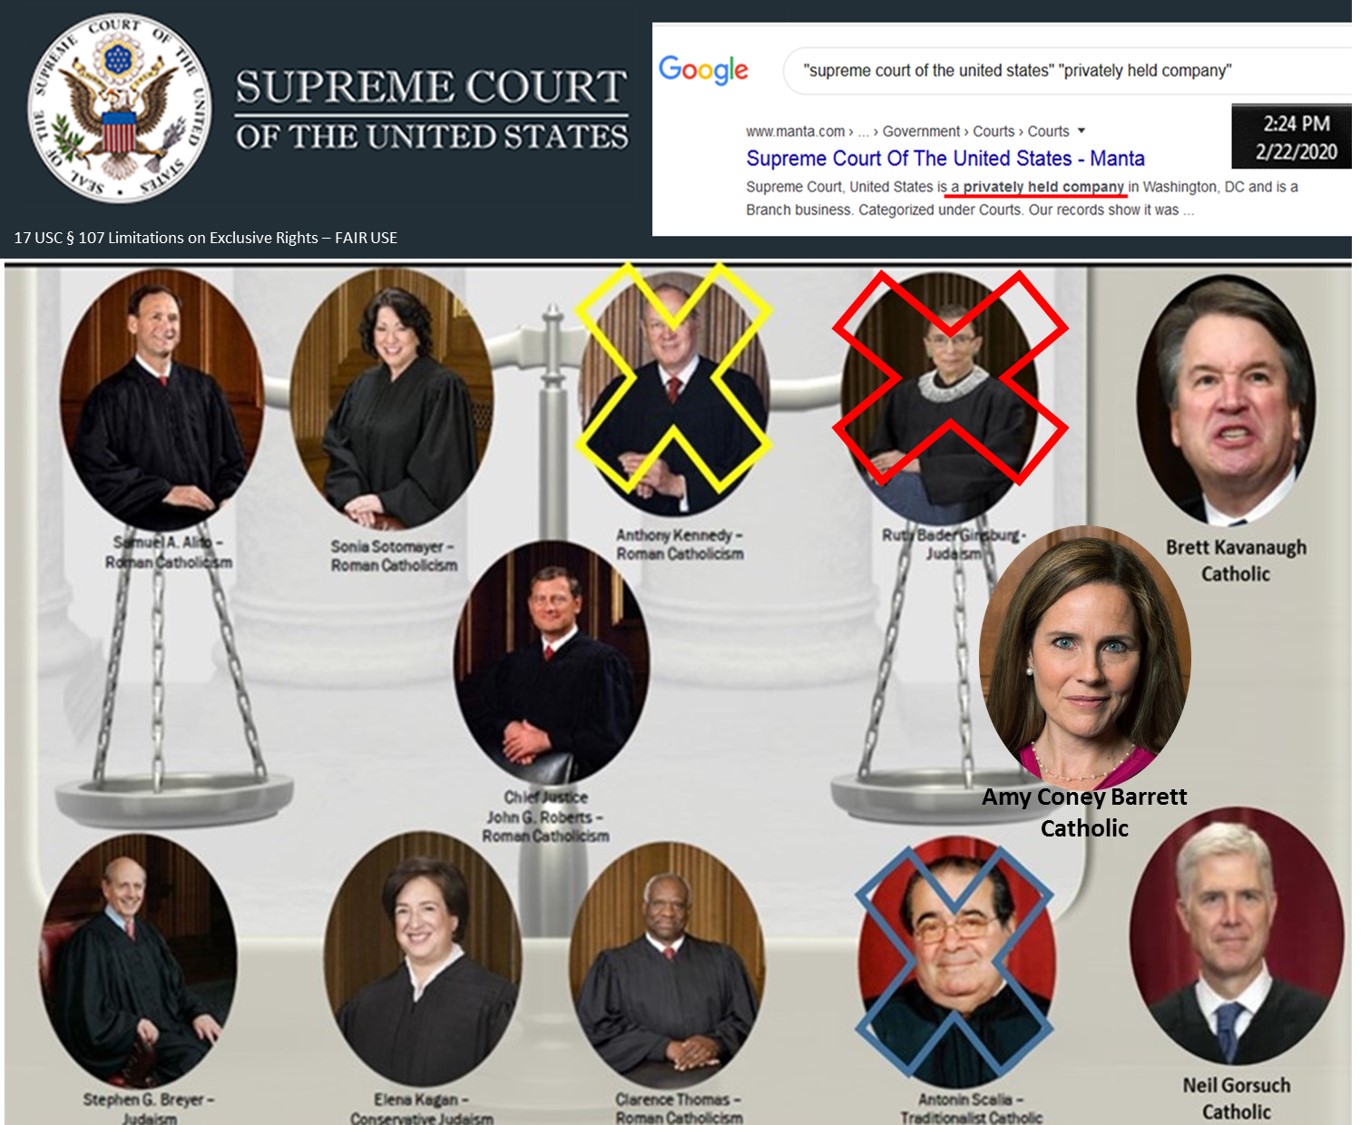 SCOTUS Privately Held Company and Justices